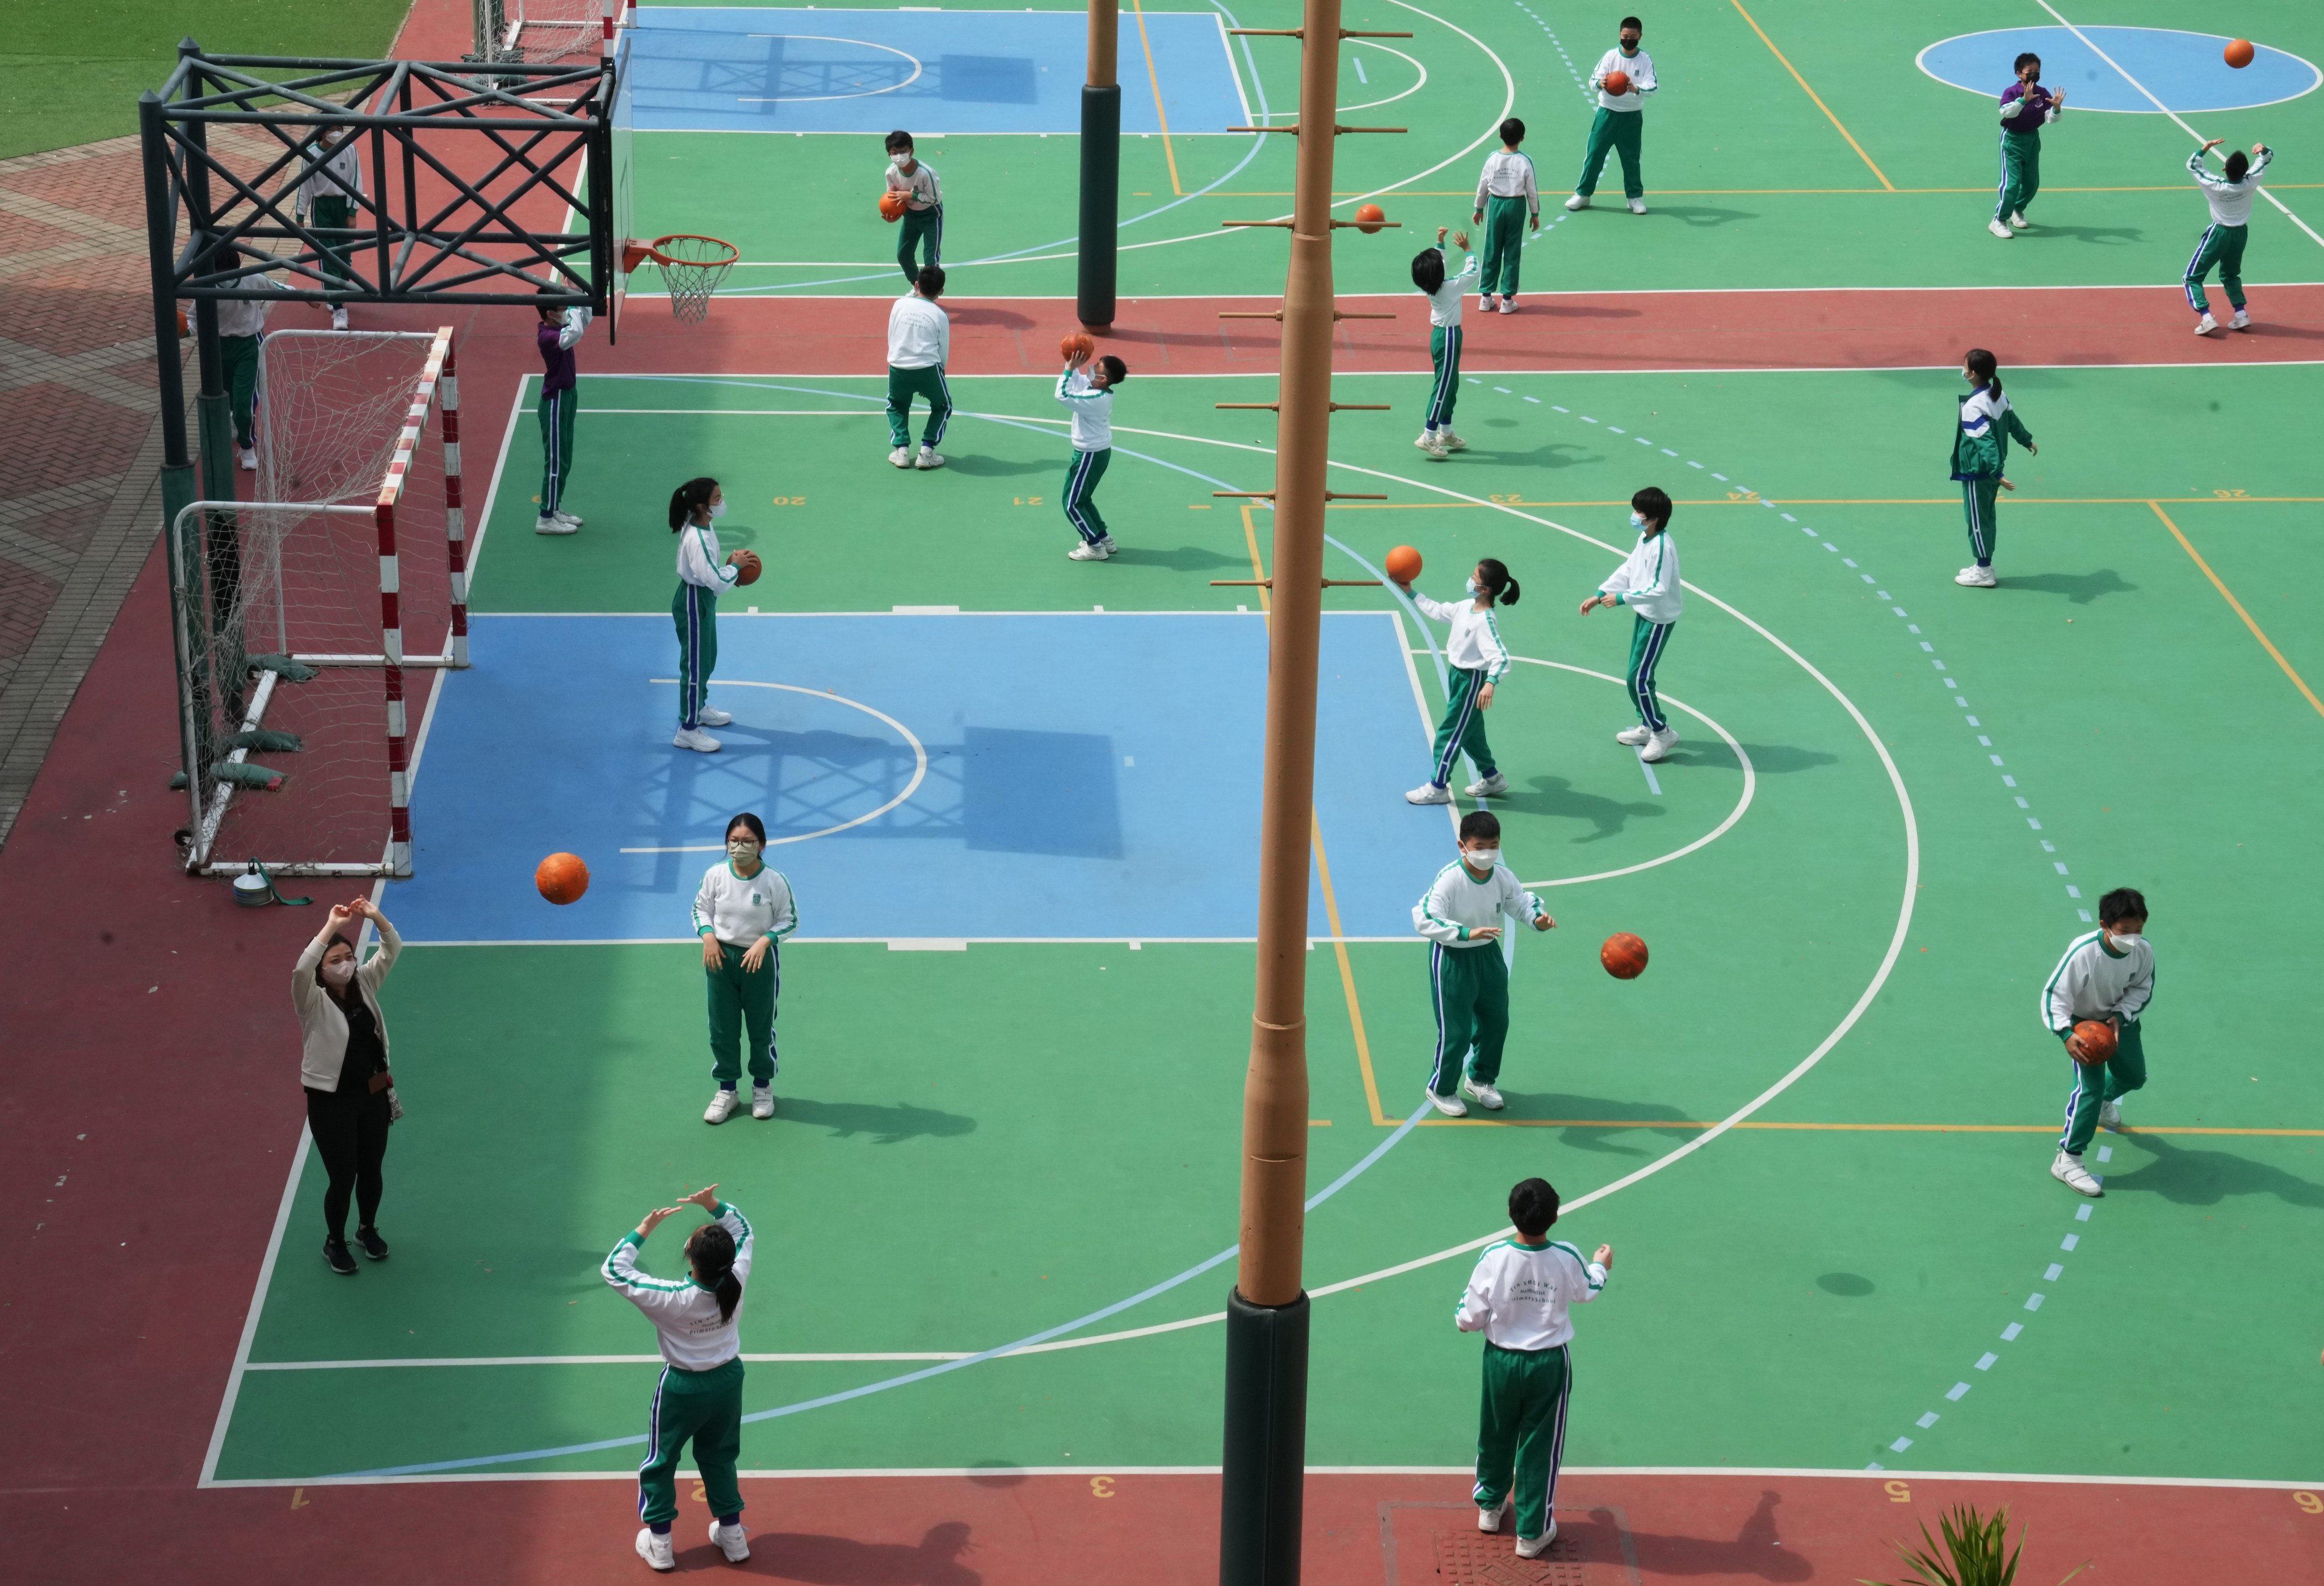 Pupils attend a physical education class at Tin Shui Wai Methodist Primary School. Photo: Sam Tsang